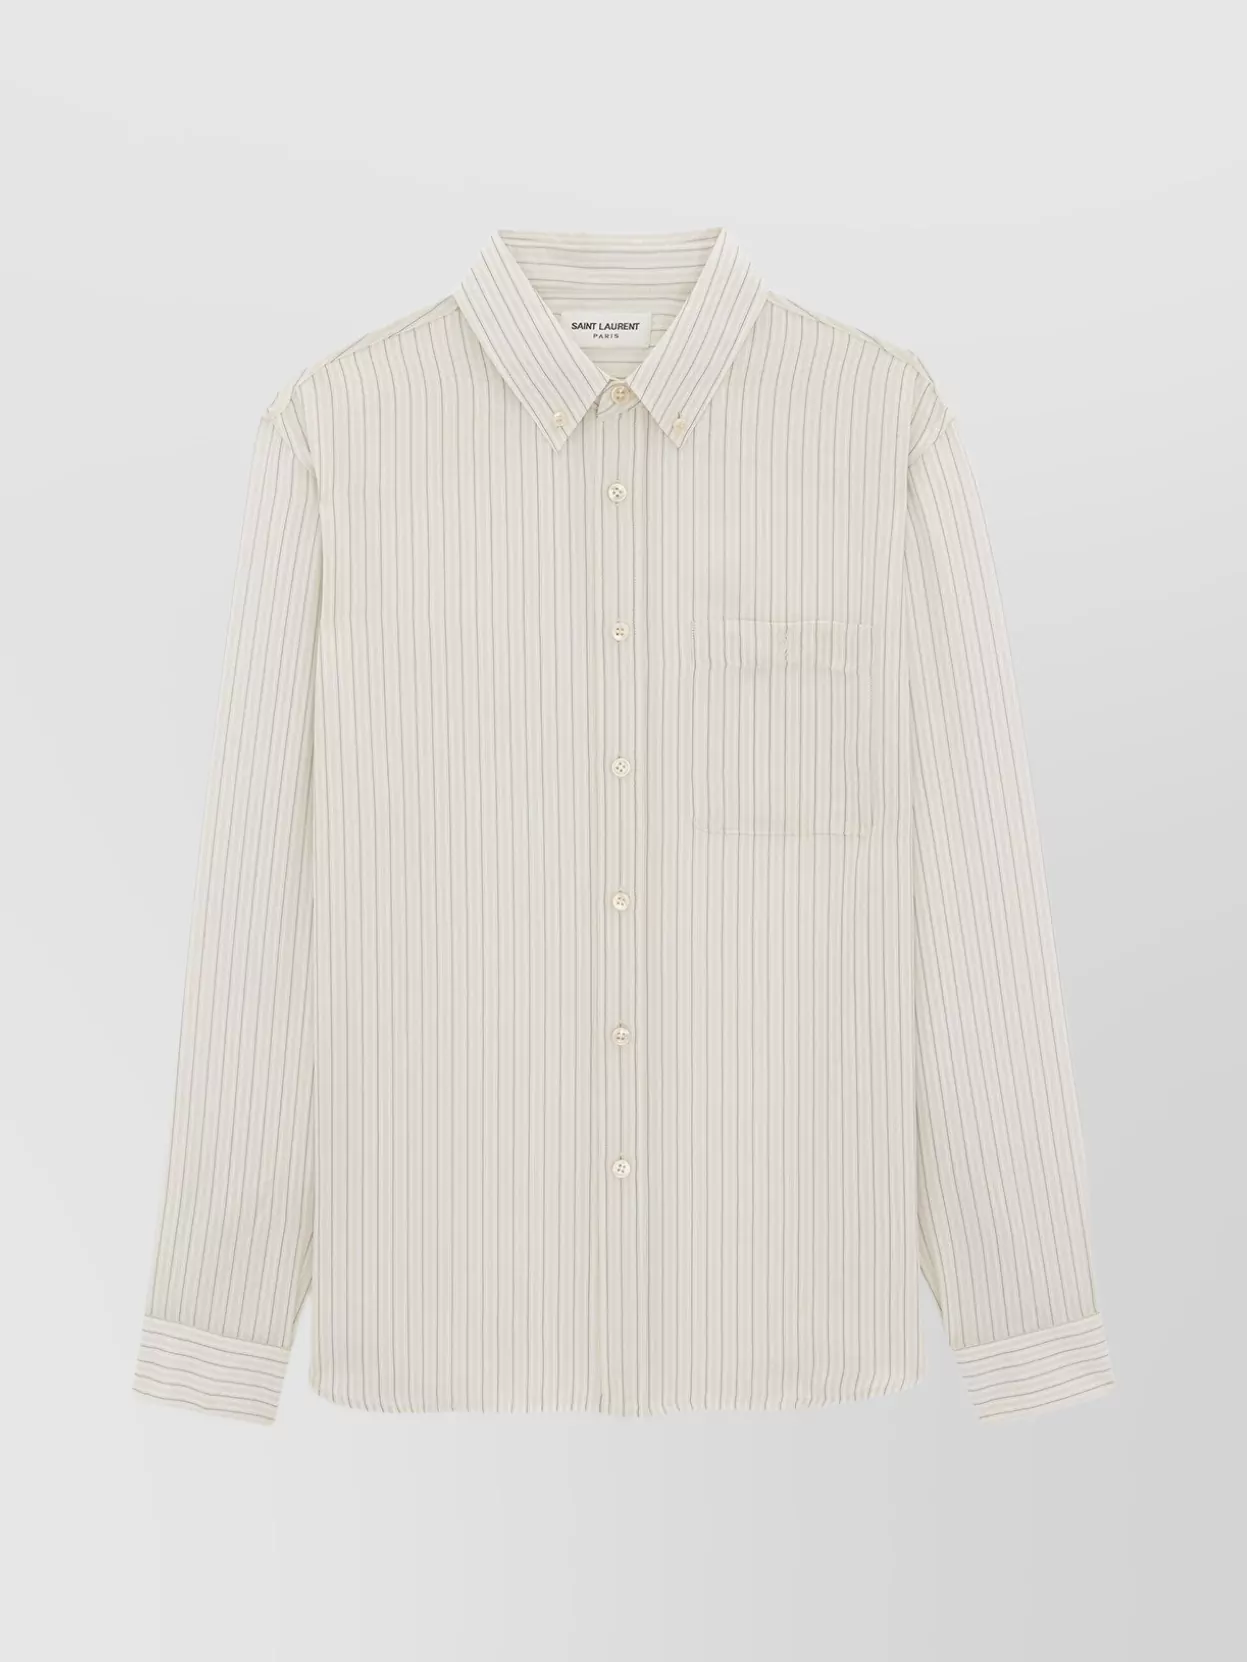 Shop Saint Laurent Collared Striped Shirt With Chest Pocket